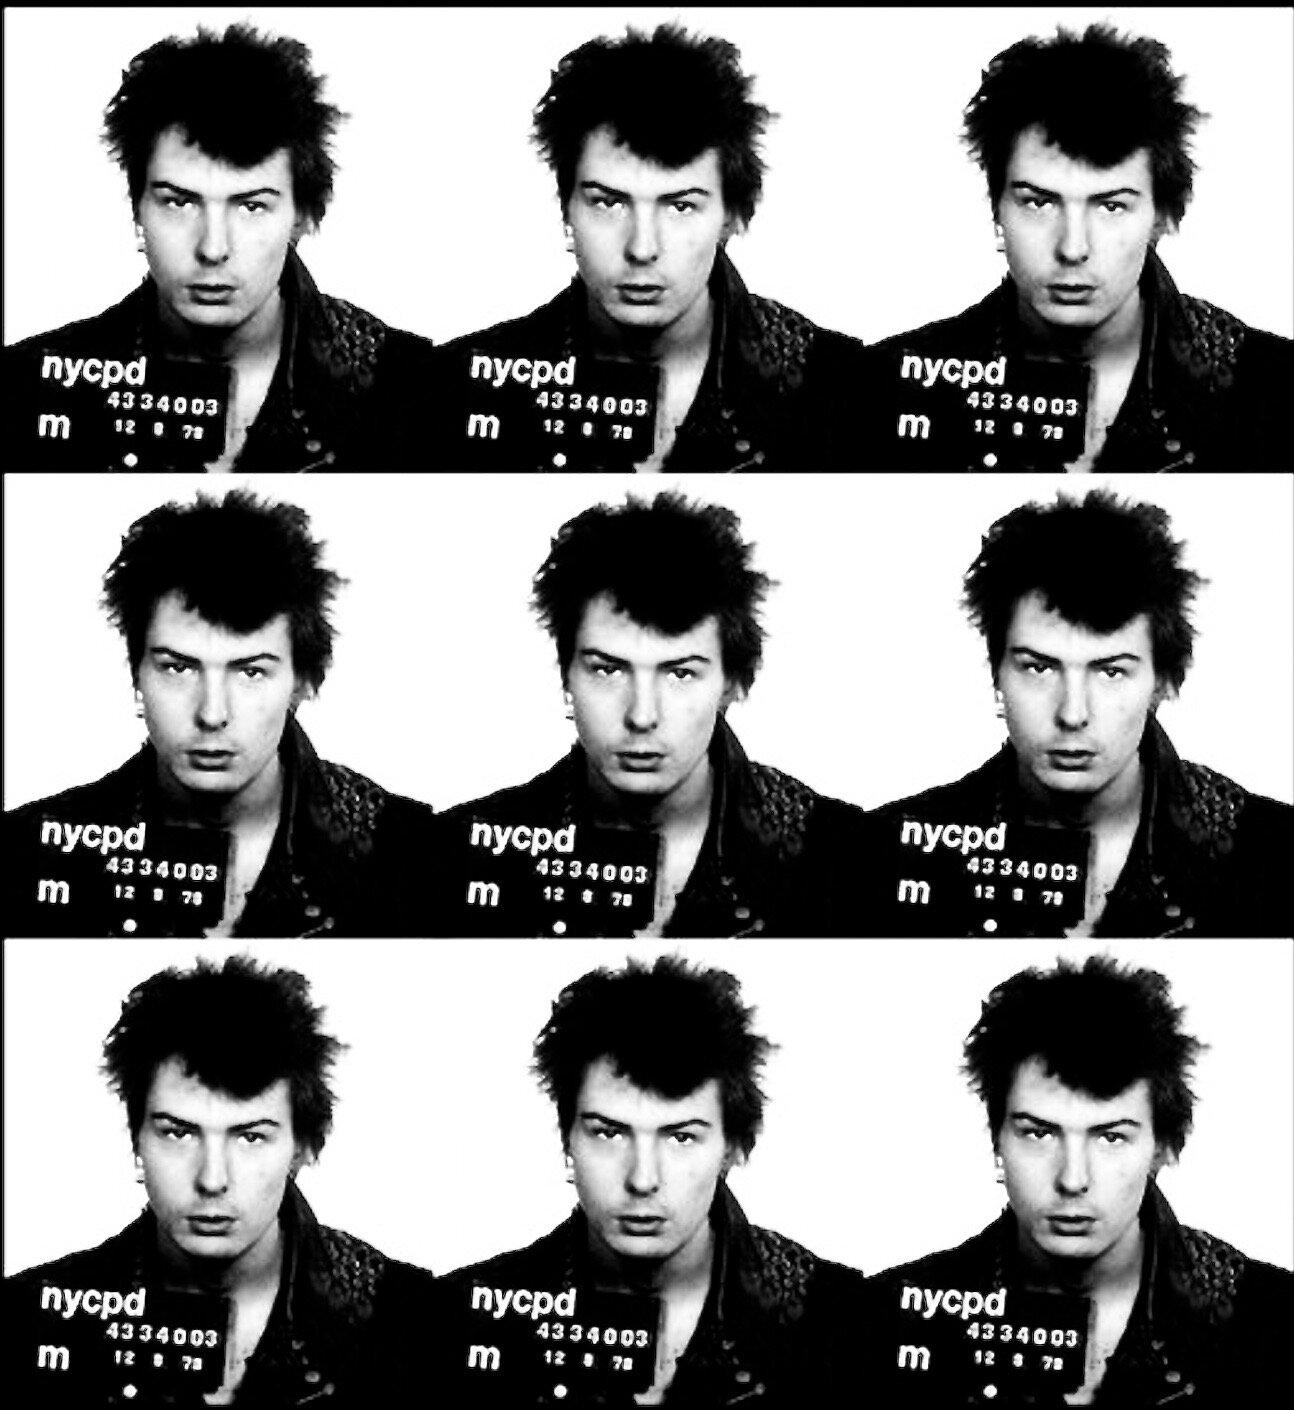 "Sid Vicious Mugshot" Print 39 x 36 inch Edition of 75 by Gerard Marti

Digital print on fine art paper. 
Ships rolled in a tube. 
Signed and numbered by the artist. 

NEW YORK - DECEMBER 8: Bassist Sid Vicious of the rock band "The Sex Pistols"